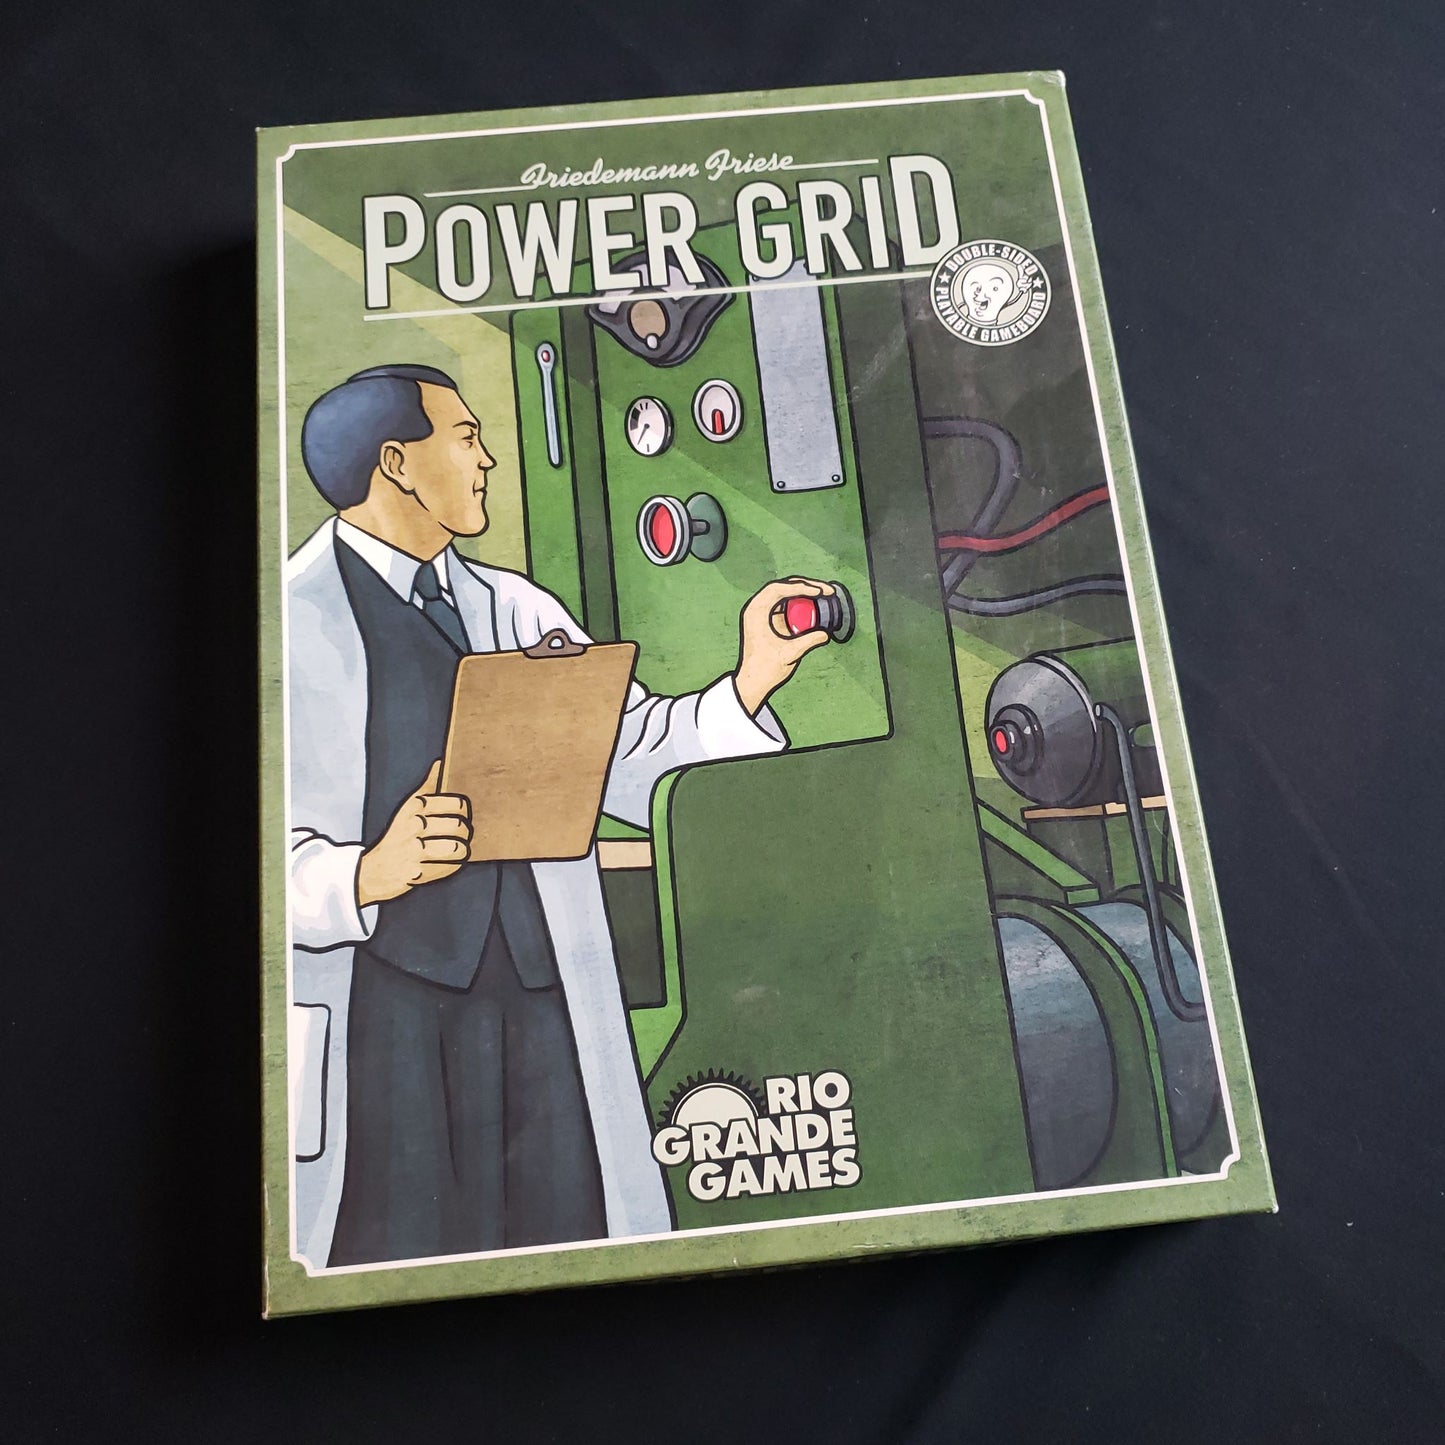 Image shows the front cover of the box of the Power Grid board game